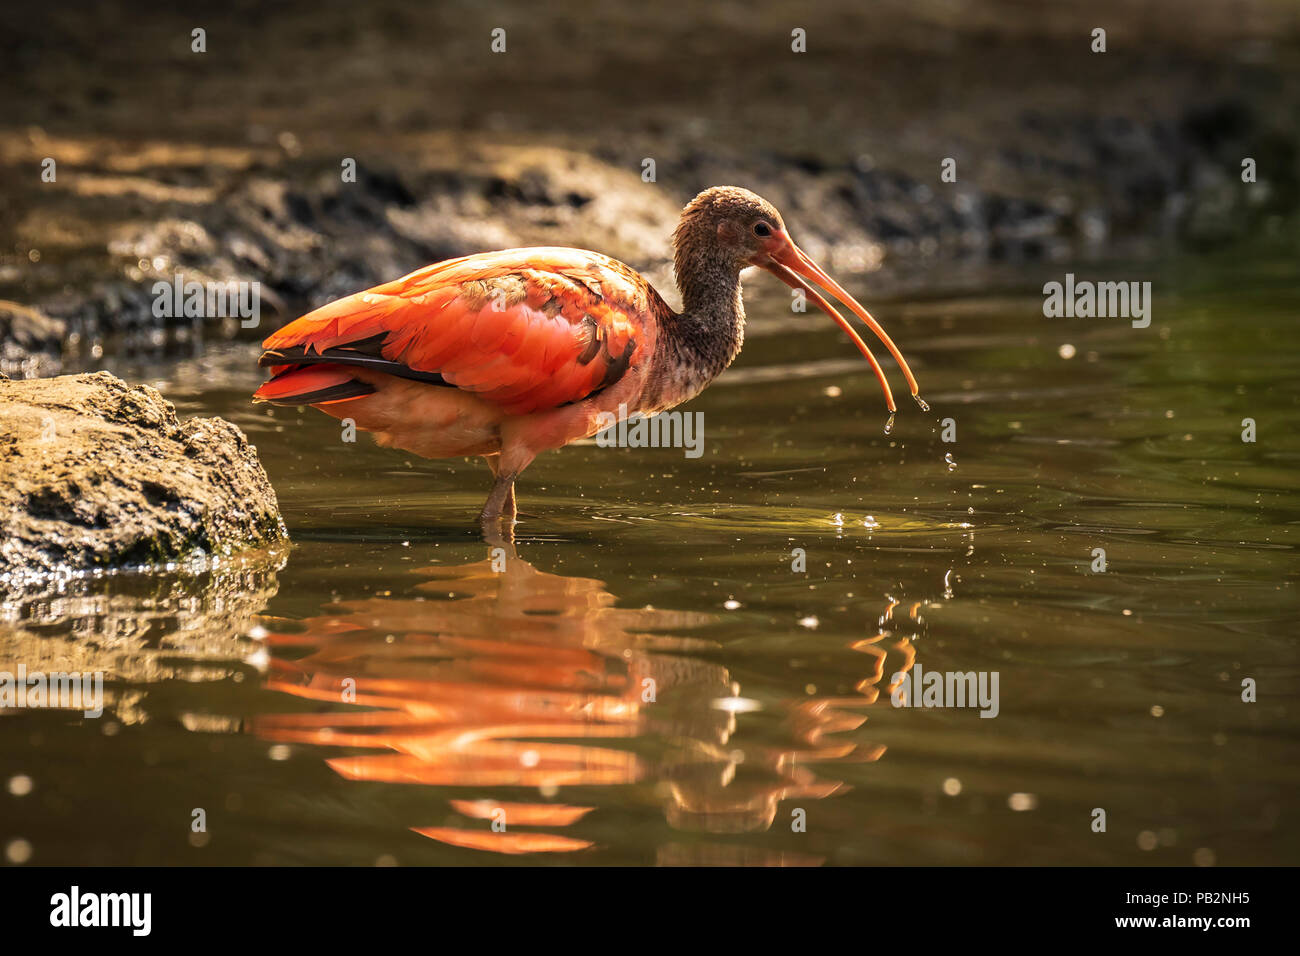 Scarlet Ibis bird Eudocimus ruber tropical wader bird foraging in water. It is one of the two national birds of Trinidad and Tobago. Stock Photo